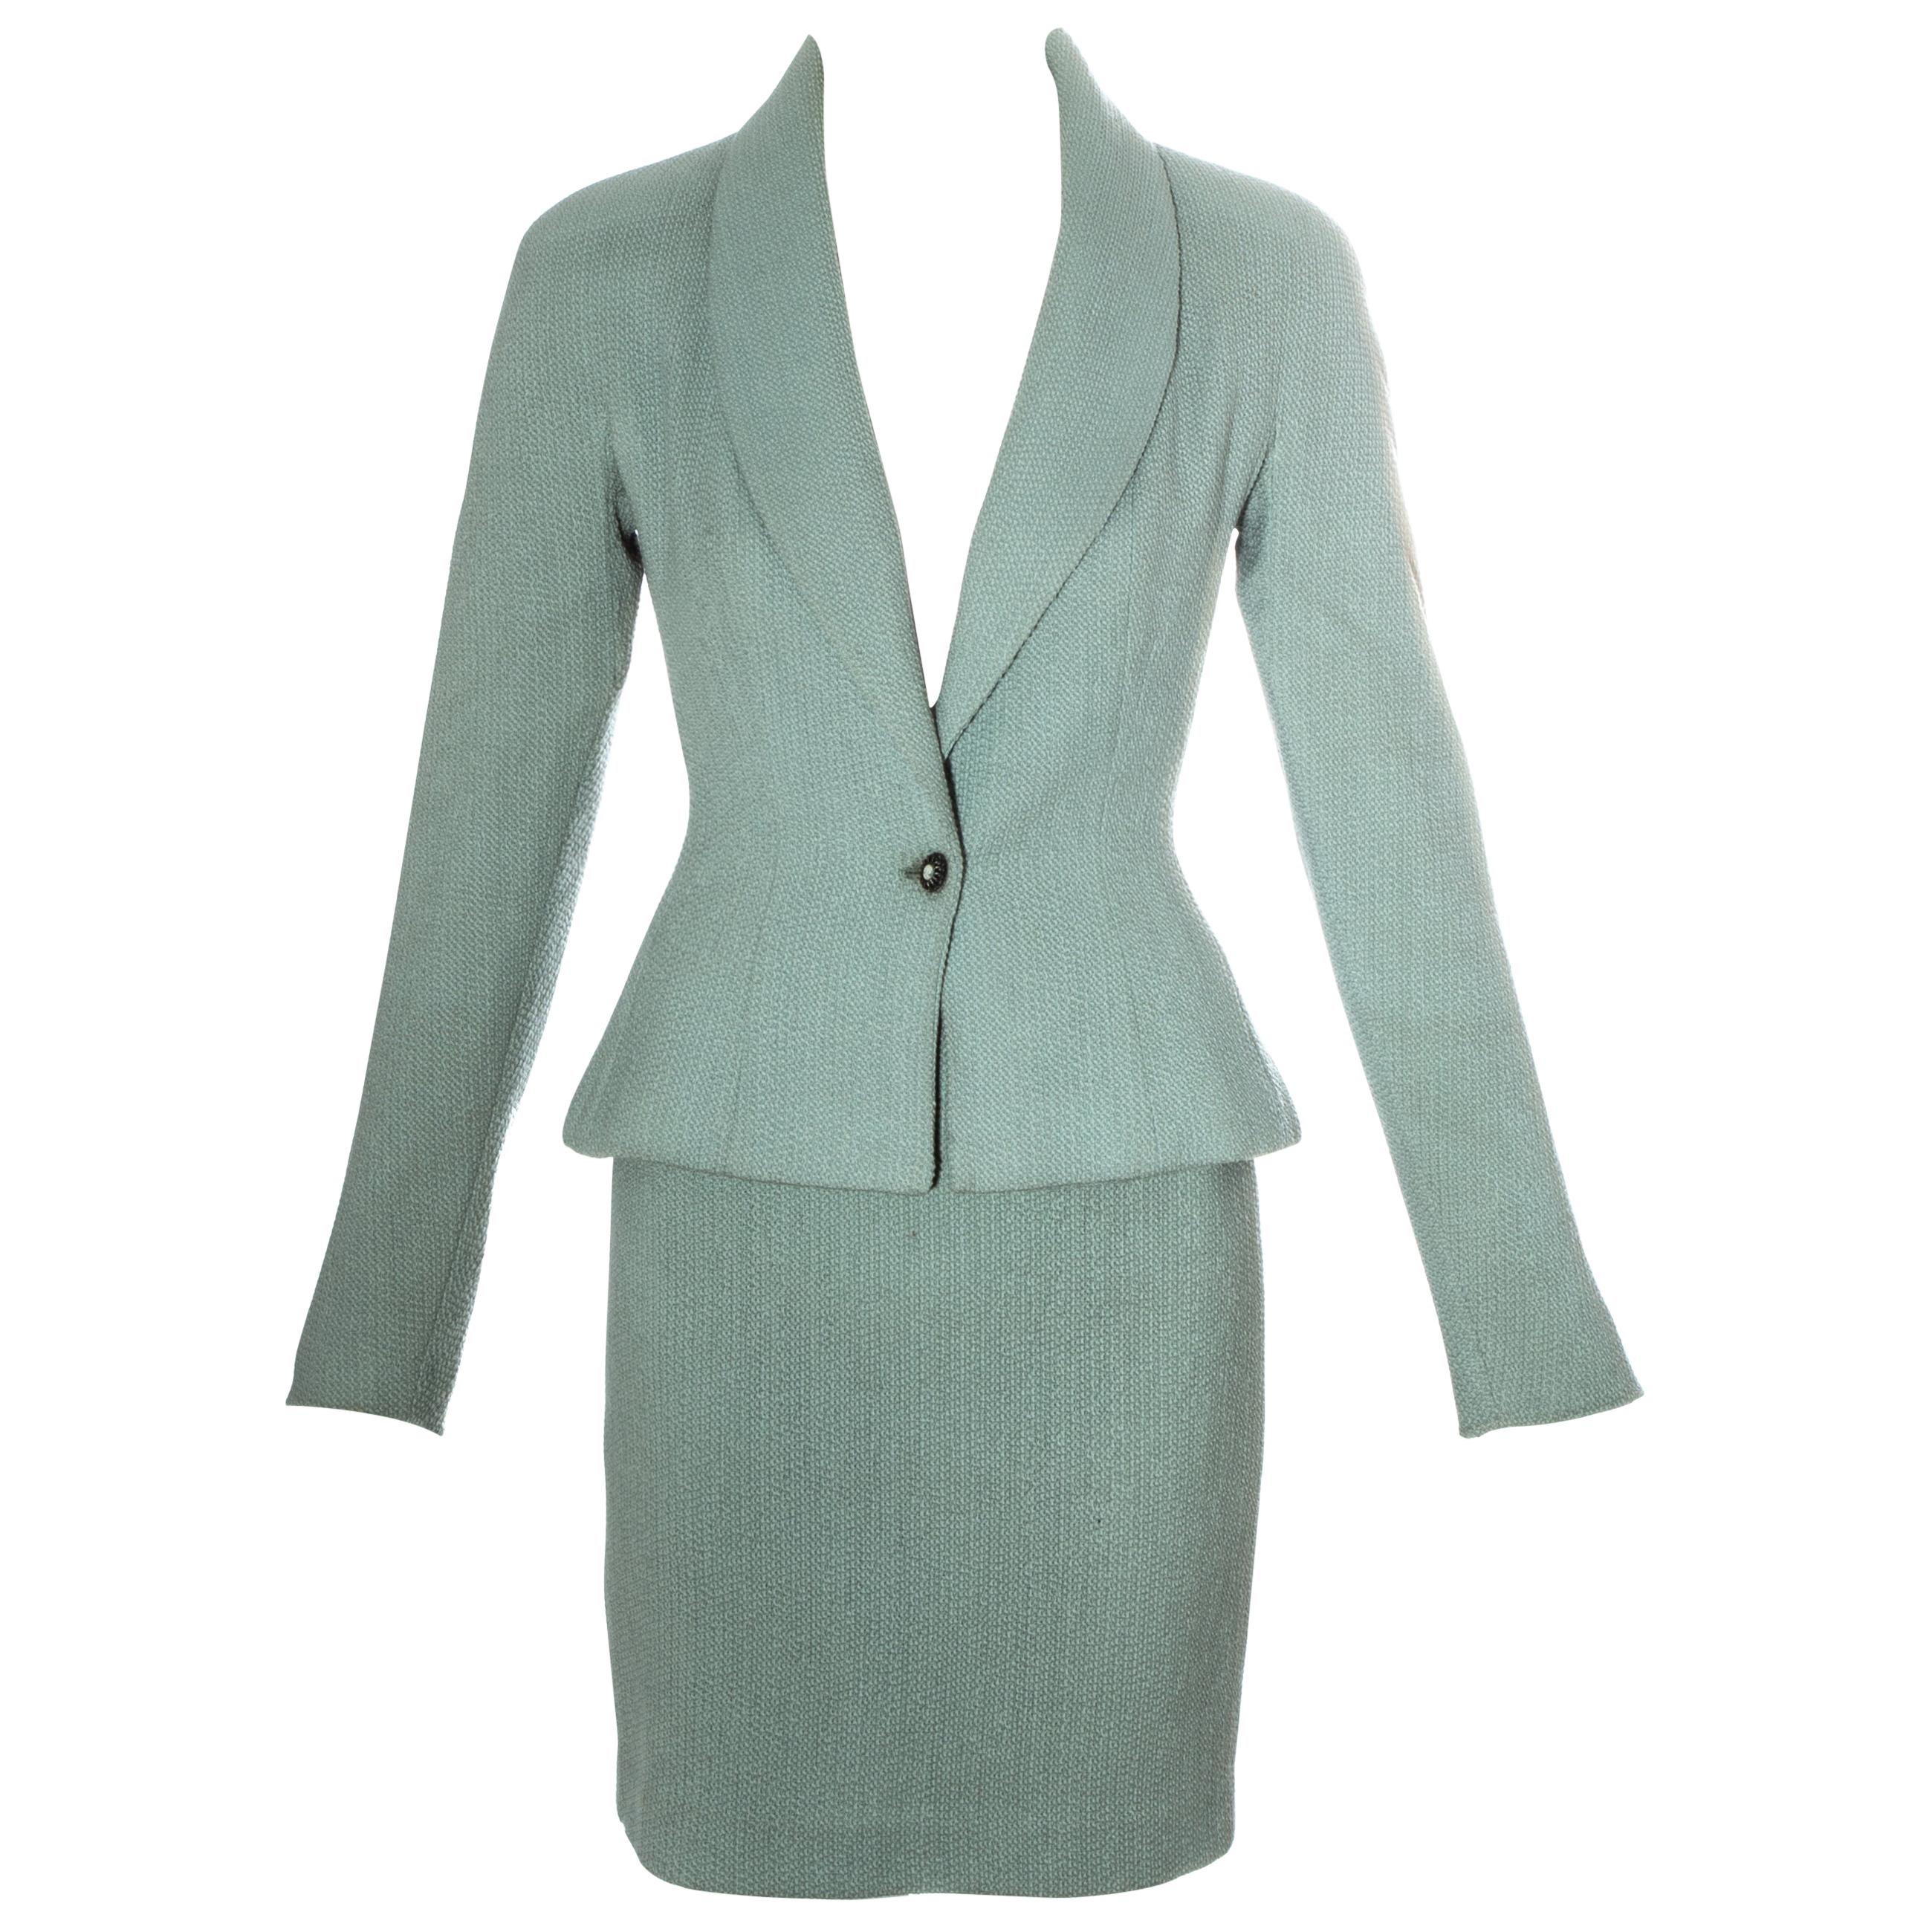 Christian Dior by John Galliano mint green wool skirt suit, ss 1998